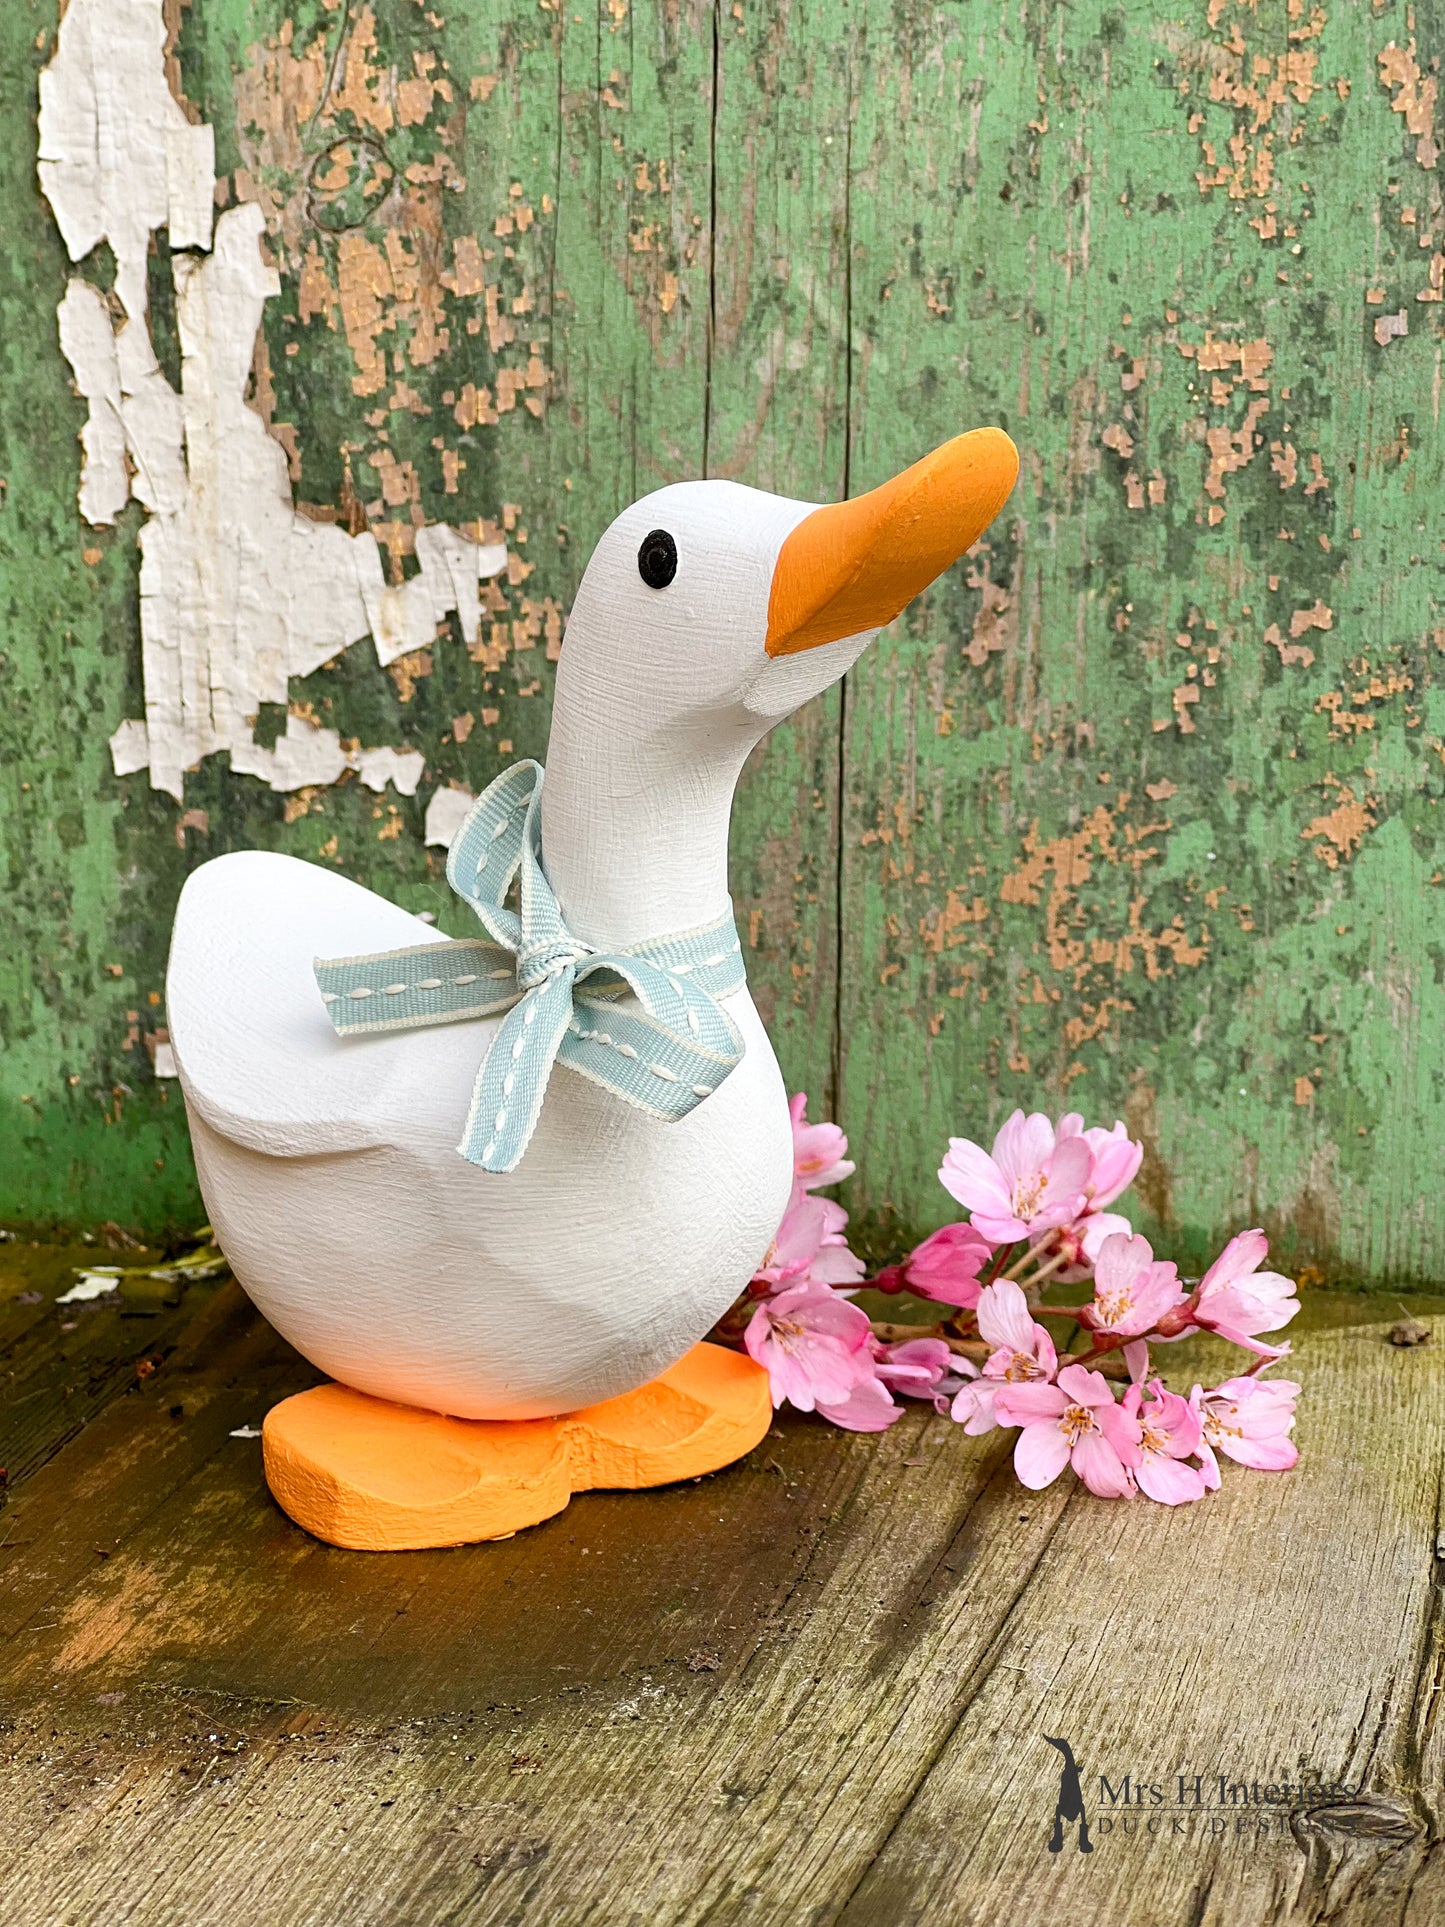 Blossom The Painted Wooden Call Duck by Mrs H The Duck Lady